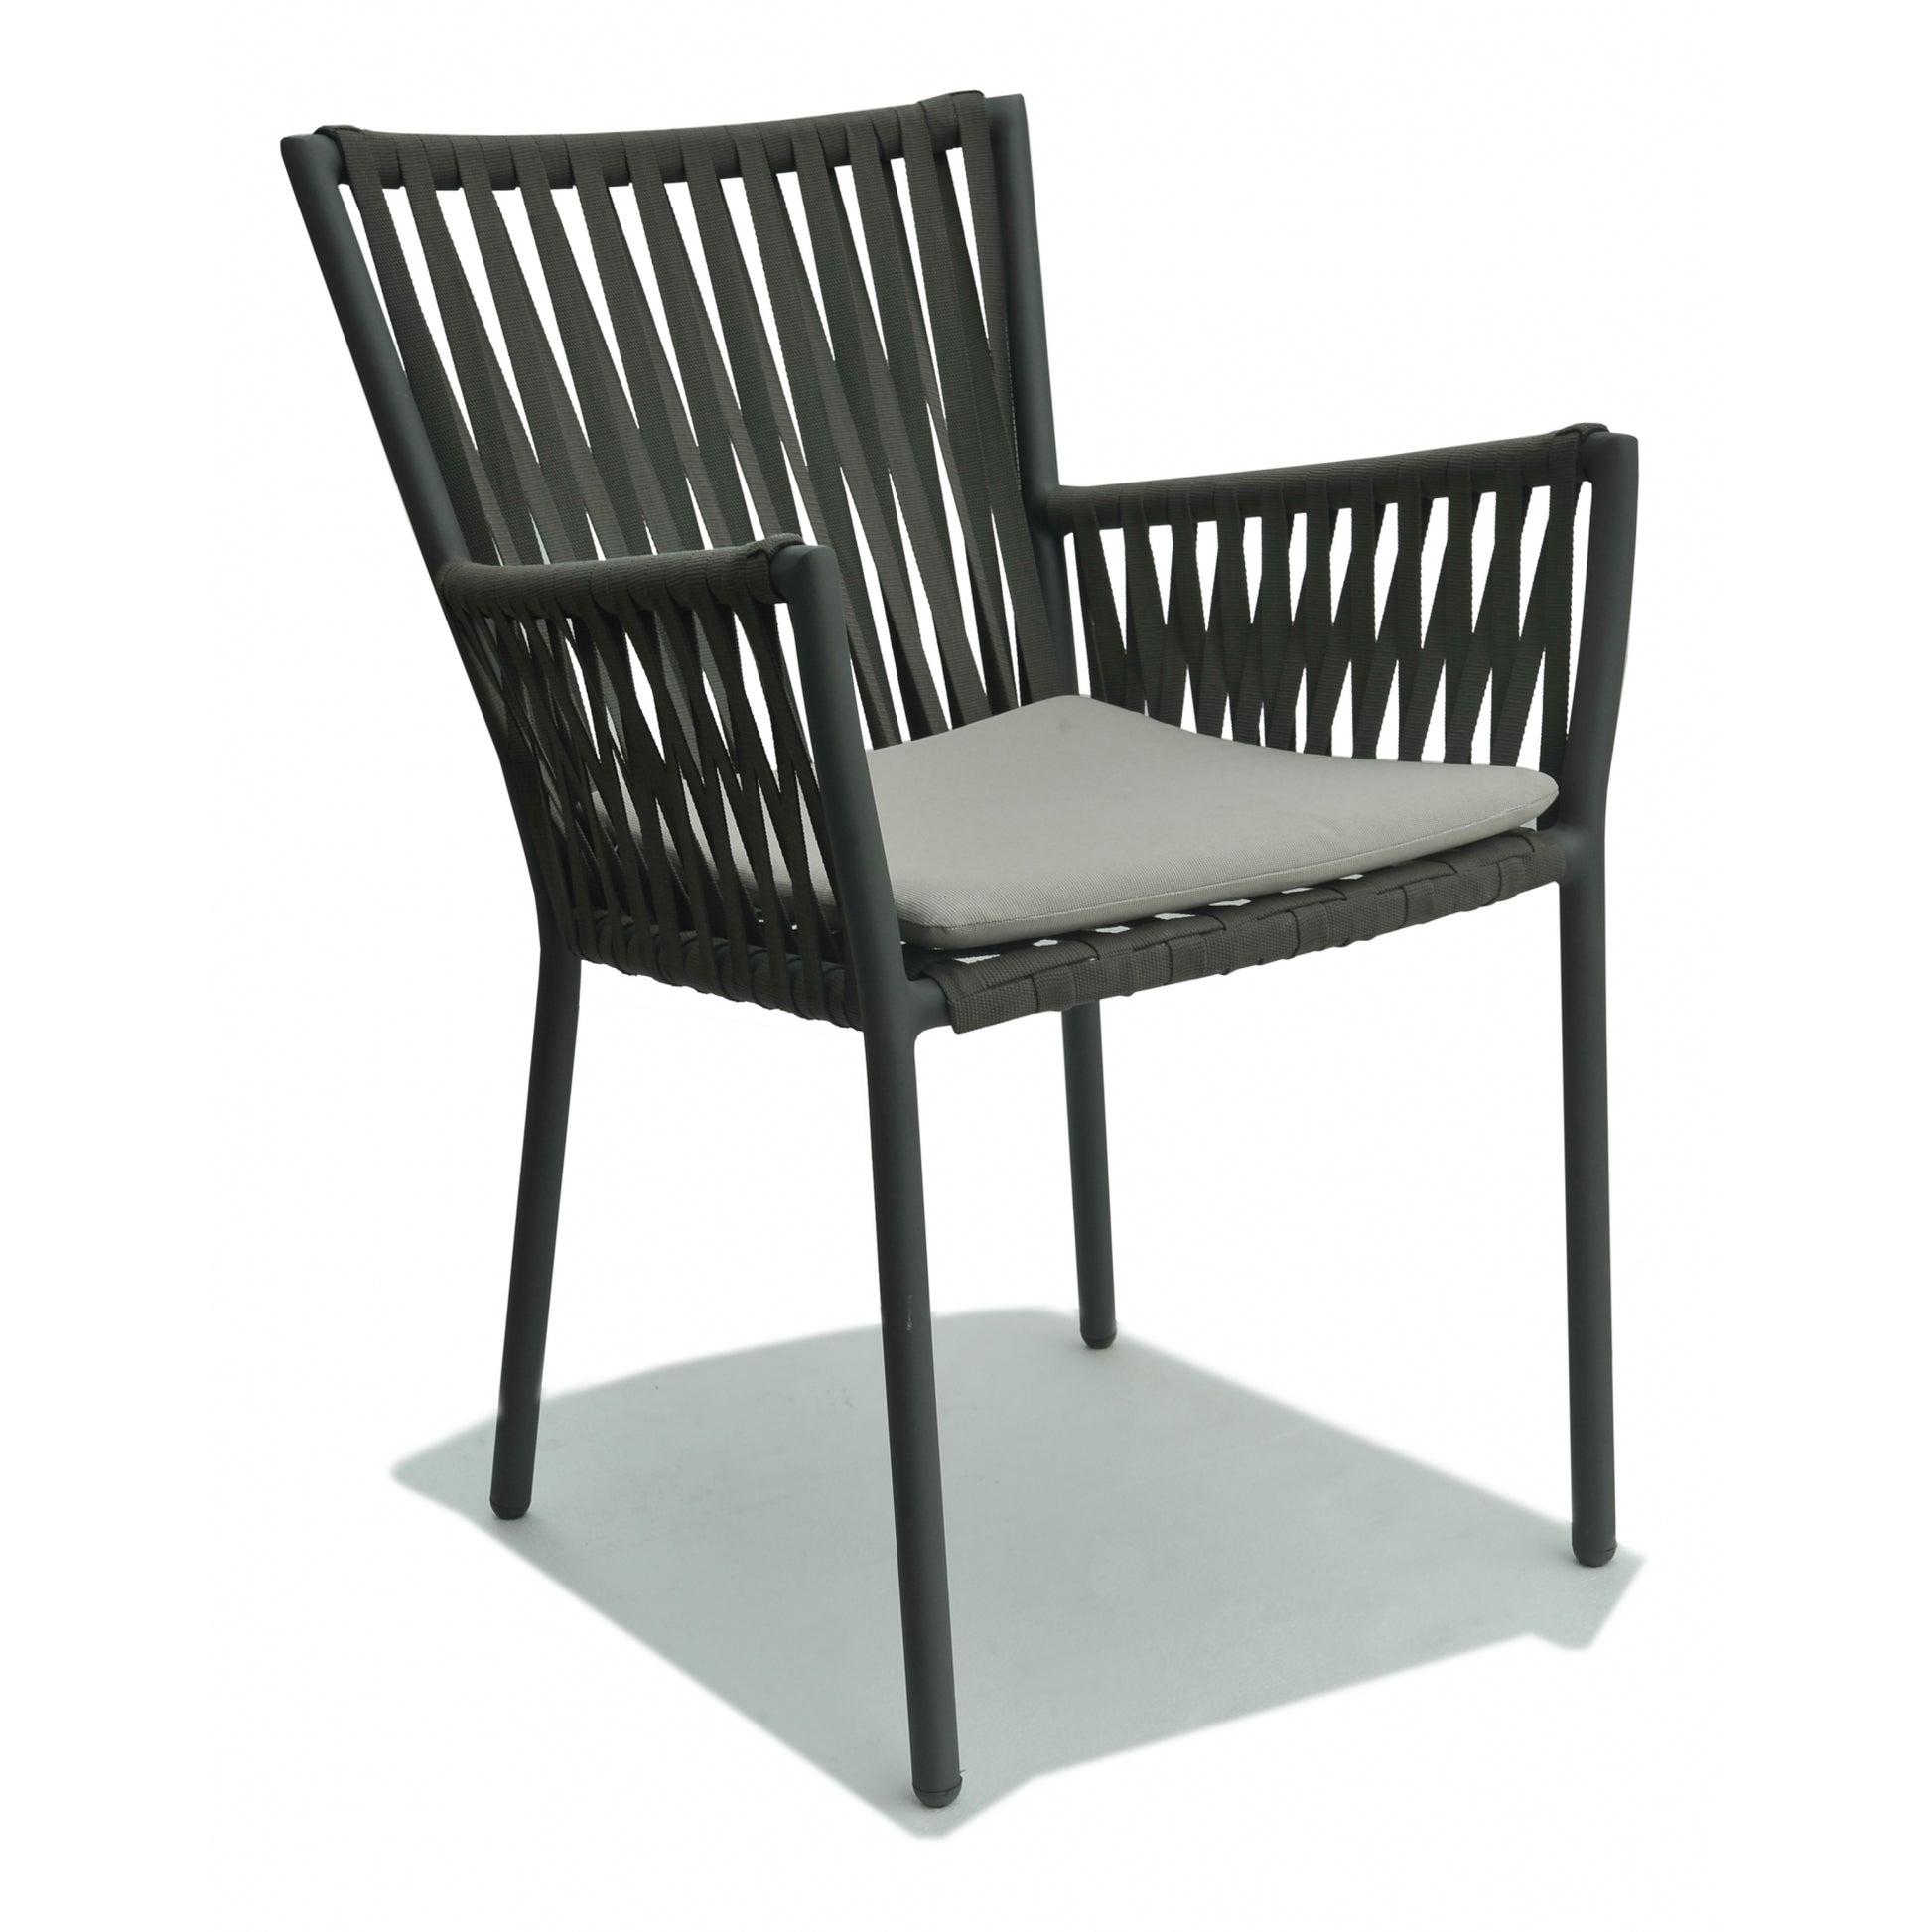 Bowline Dining Chair - PadioLiving - Bowline Dining Chair - Outdoor Dining Chair - Dark Grey 21mm Strap / Metal-Perla(£411) - PadioLiving